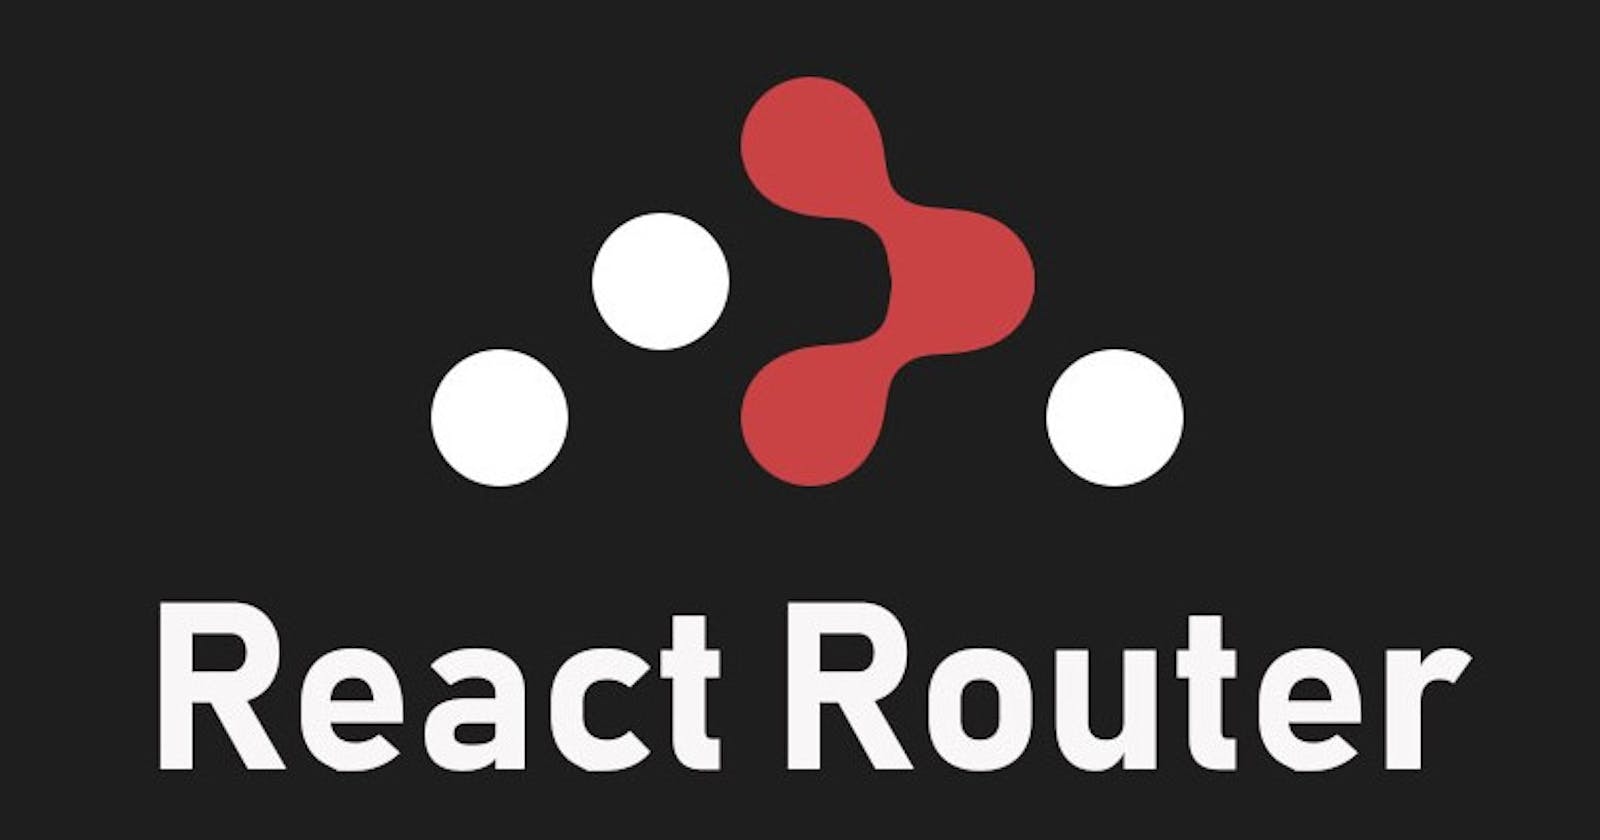 All you need to know about React Router v6